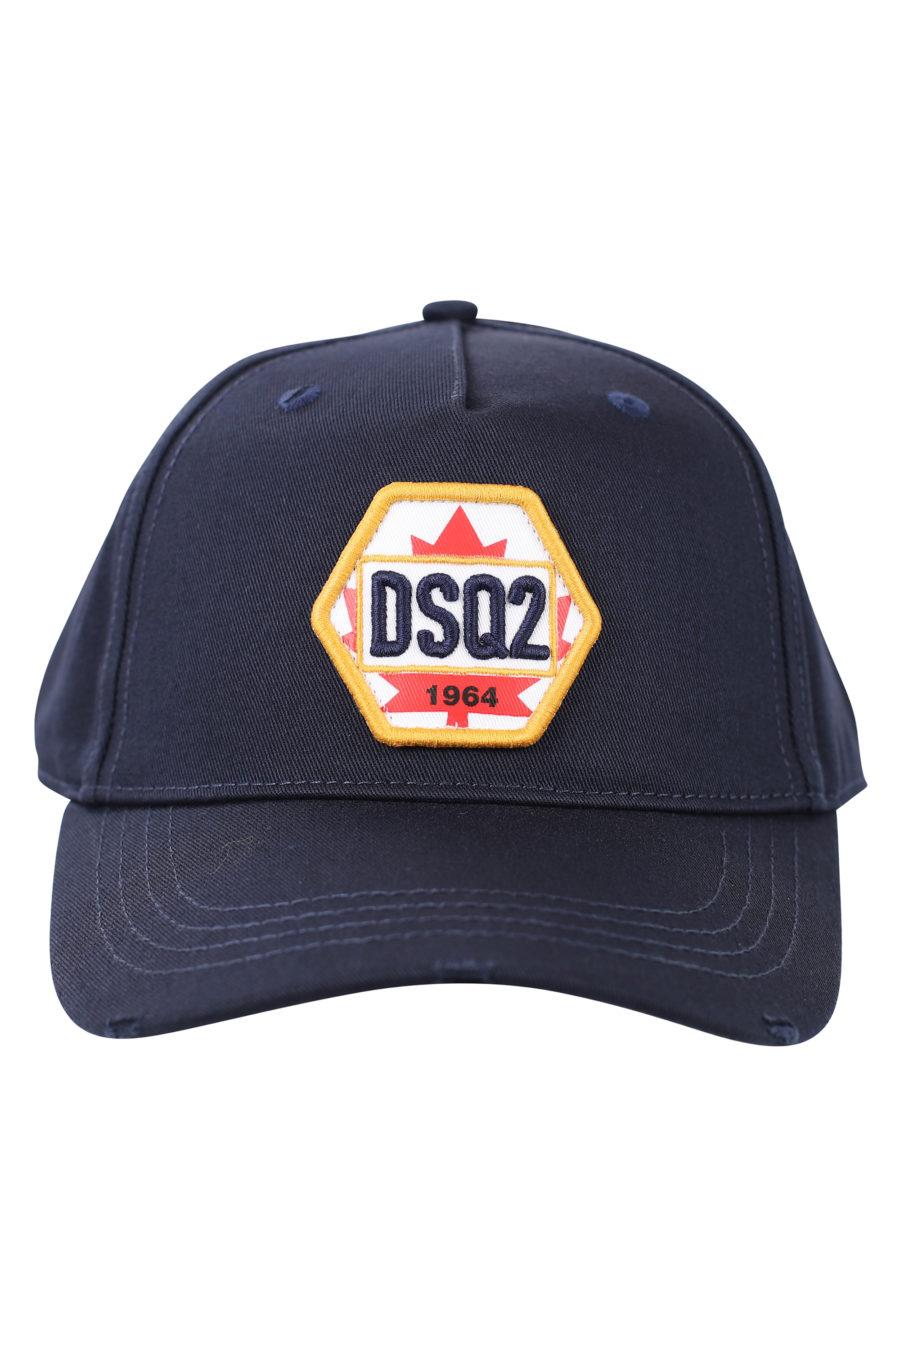 Adjustable blue cap with yellow "dsq2" patch - IMG 0463